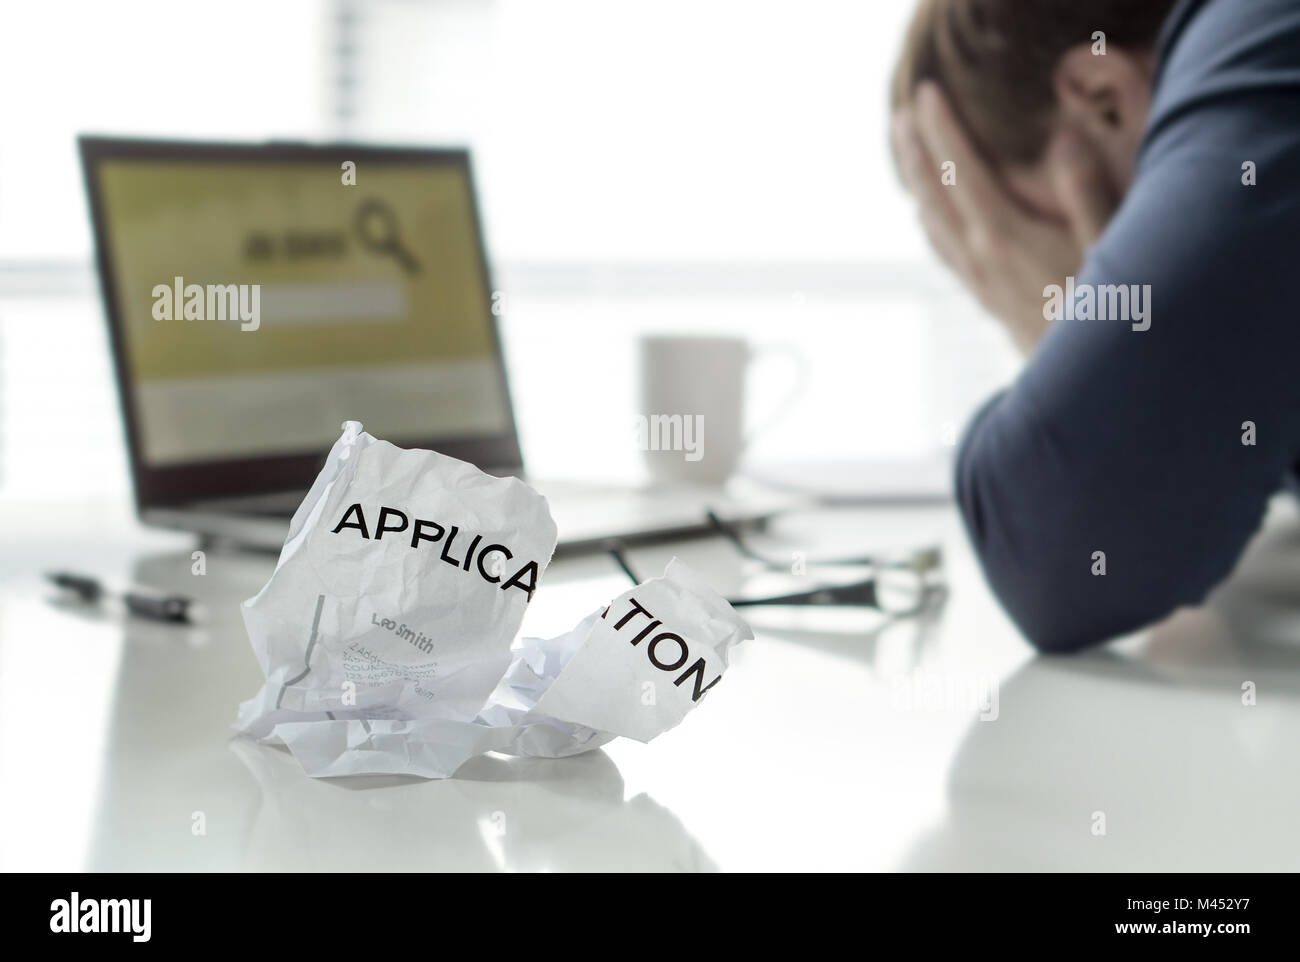 Frustration in job search. Unemployed man cant' find work. Jobless, sad, confused, worried and tired person holding hands on face. Ripped application. Stock Photo